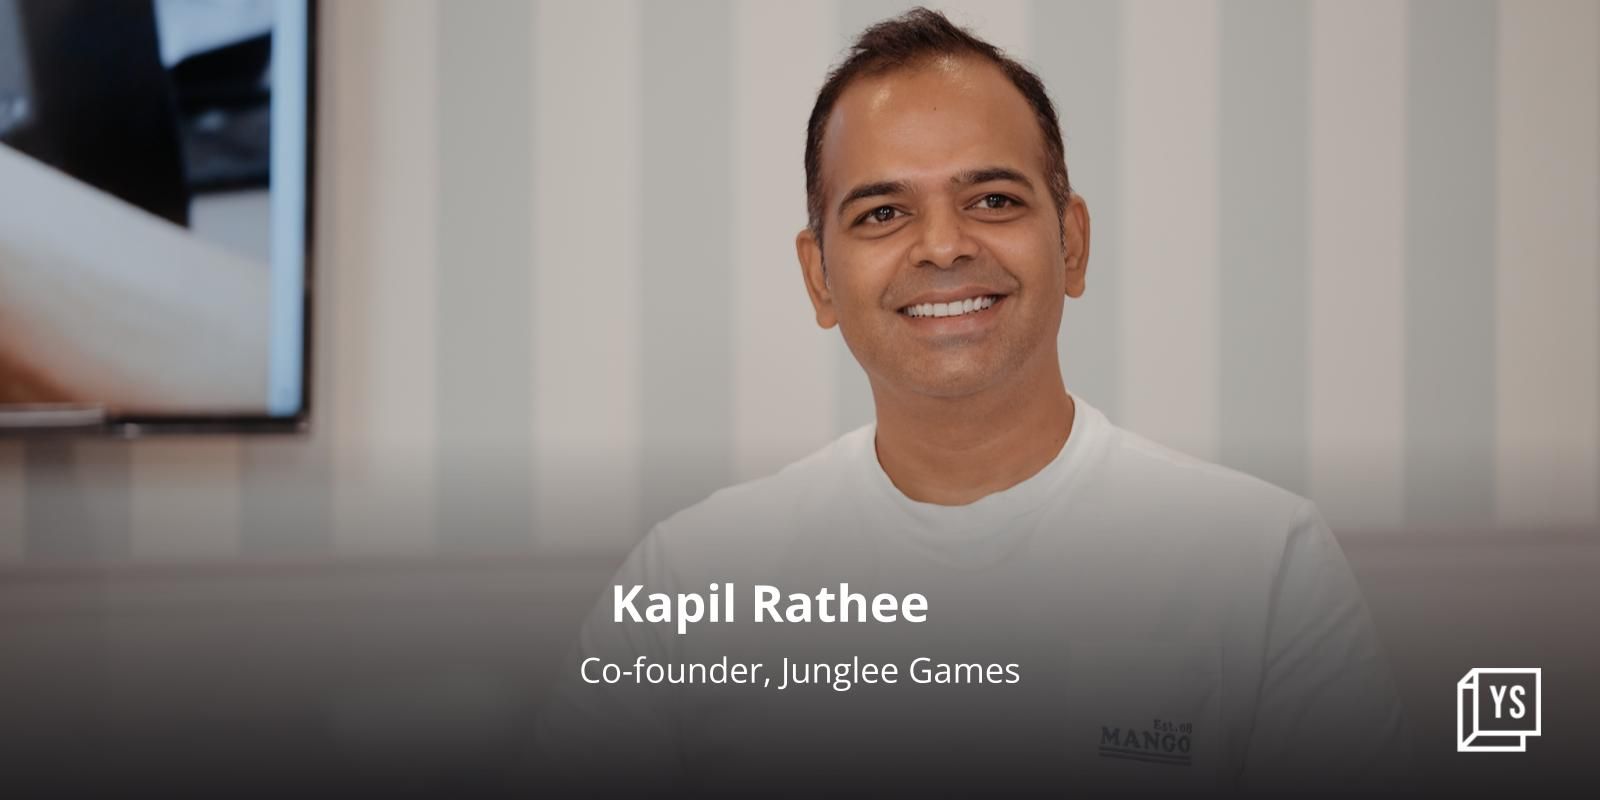 Kapil Rathee elevated to co-Founder of Junglee Games